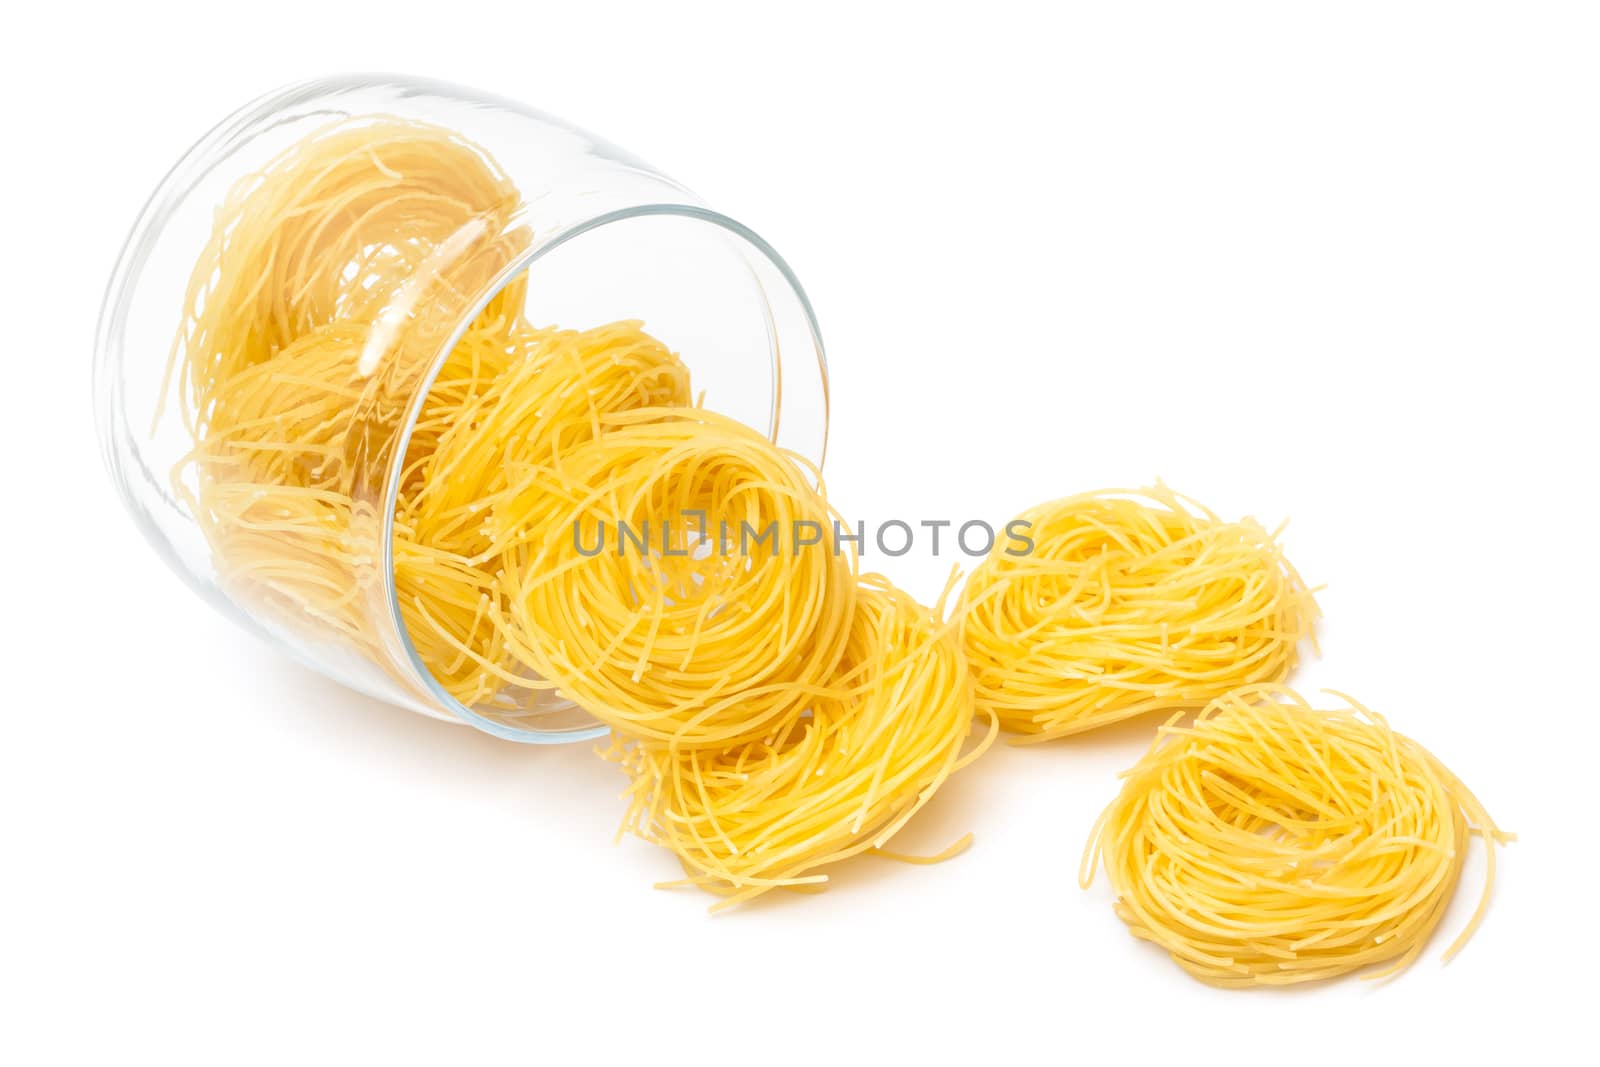 pasta in glass jar on a white background